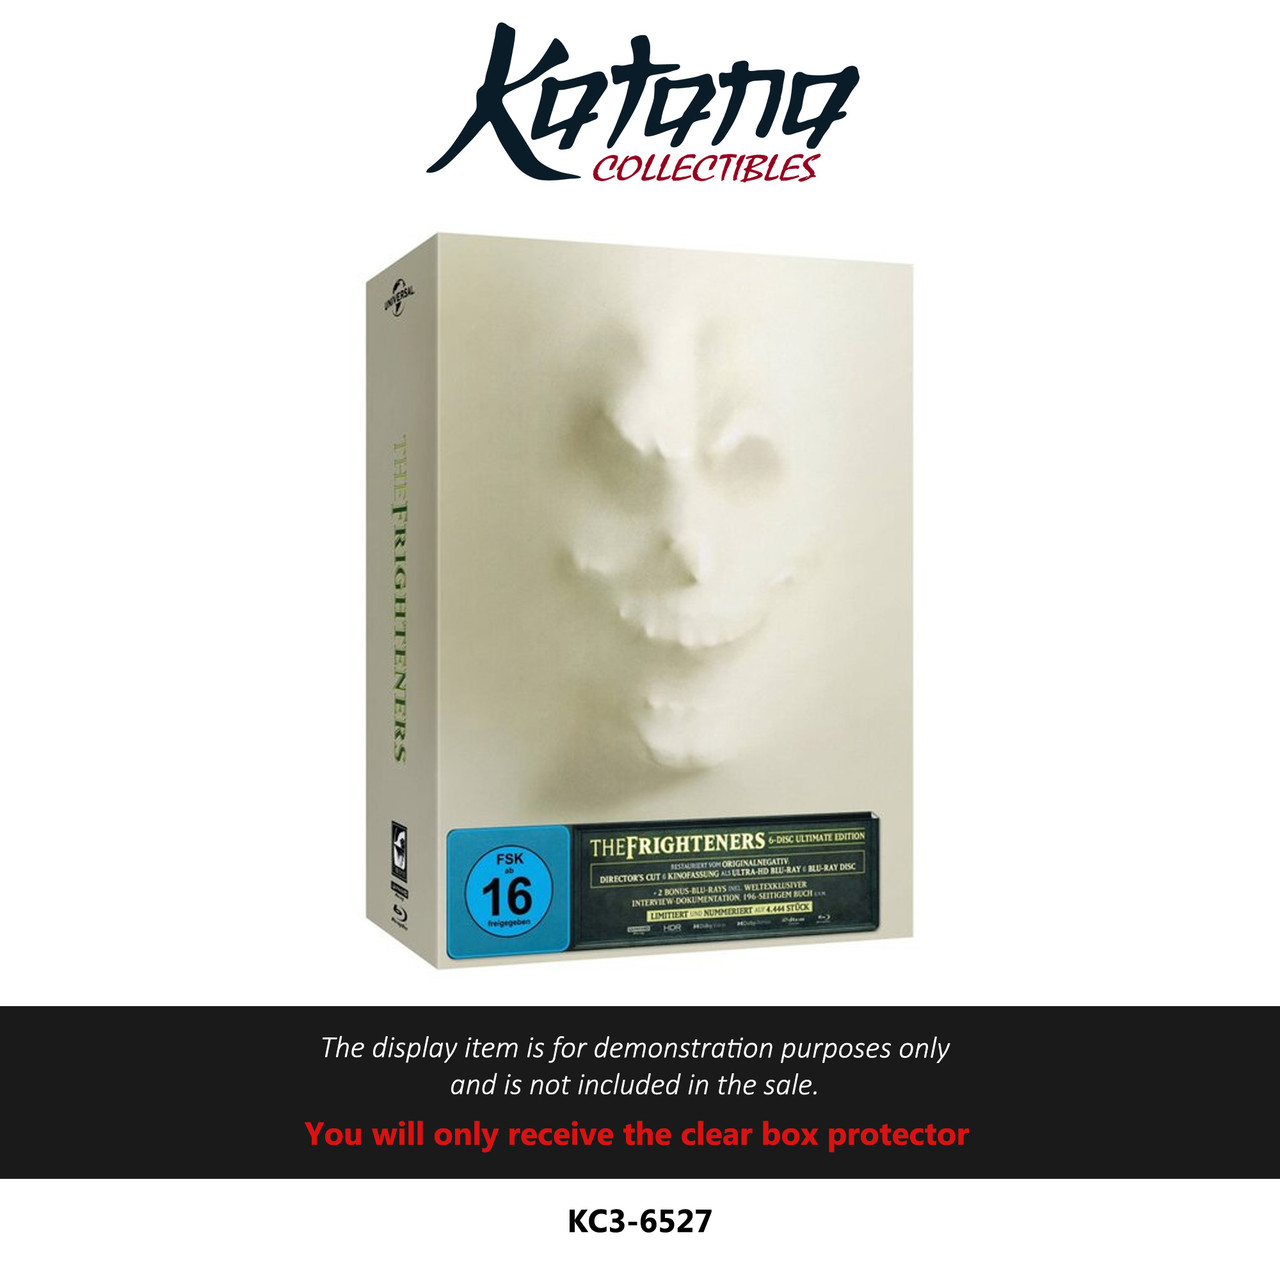 Katana Collectibles Protector For The Frighteners 4k (Turbine)